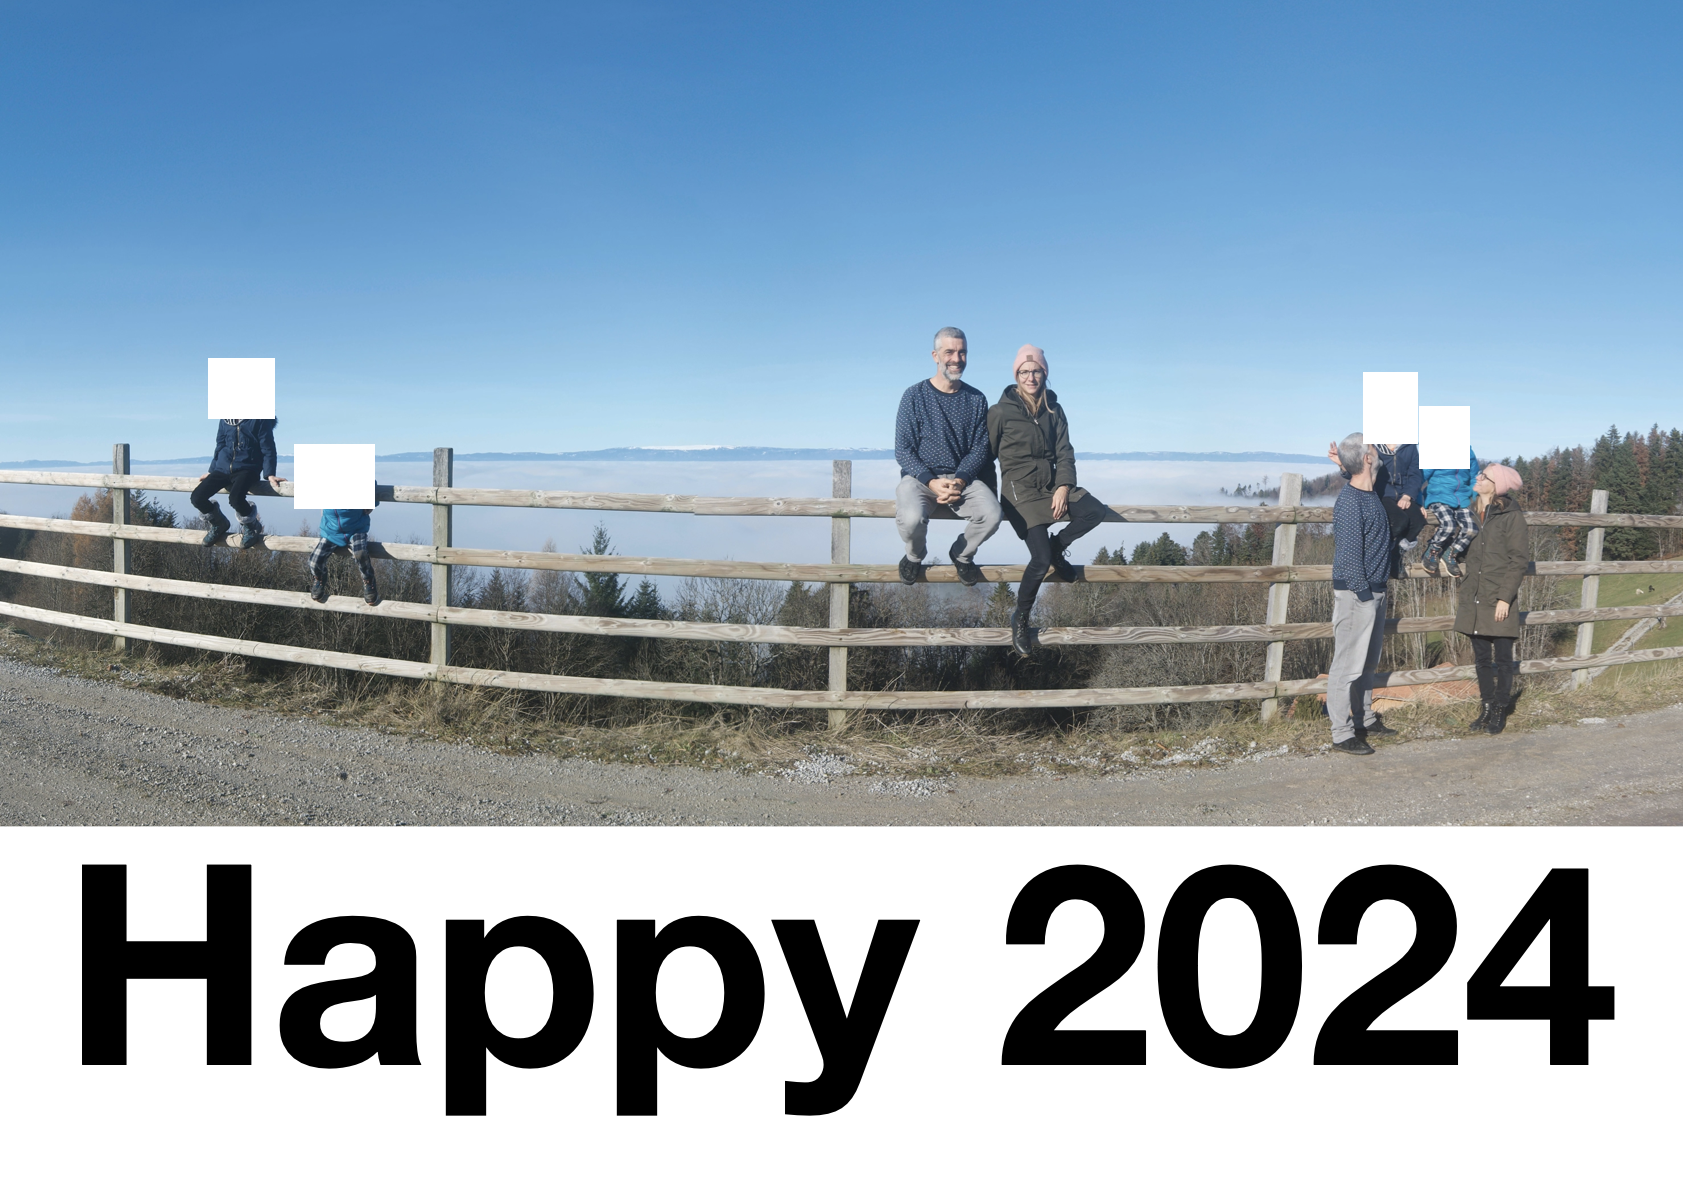 A composite panoramic image of two kids, two adults and the whole family, in a 2, 0, 2, 4 pattern.